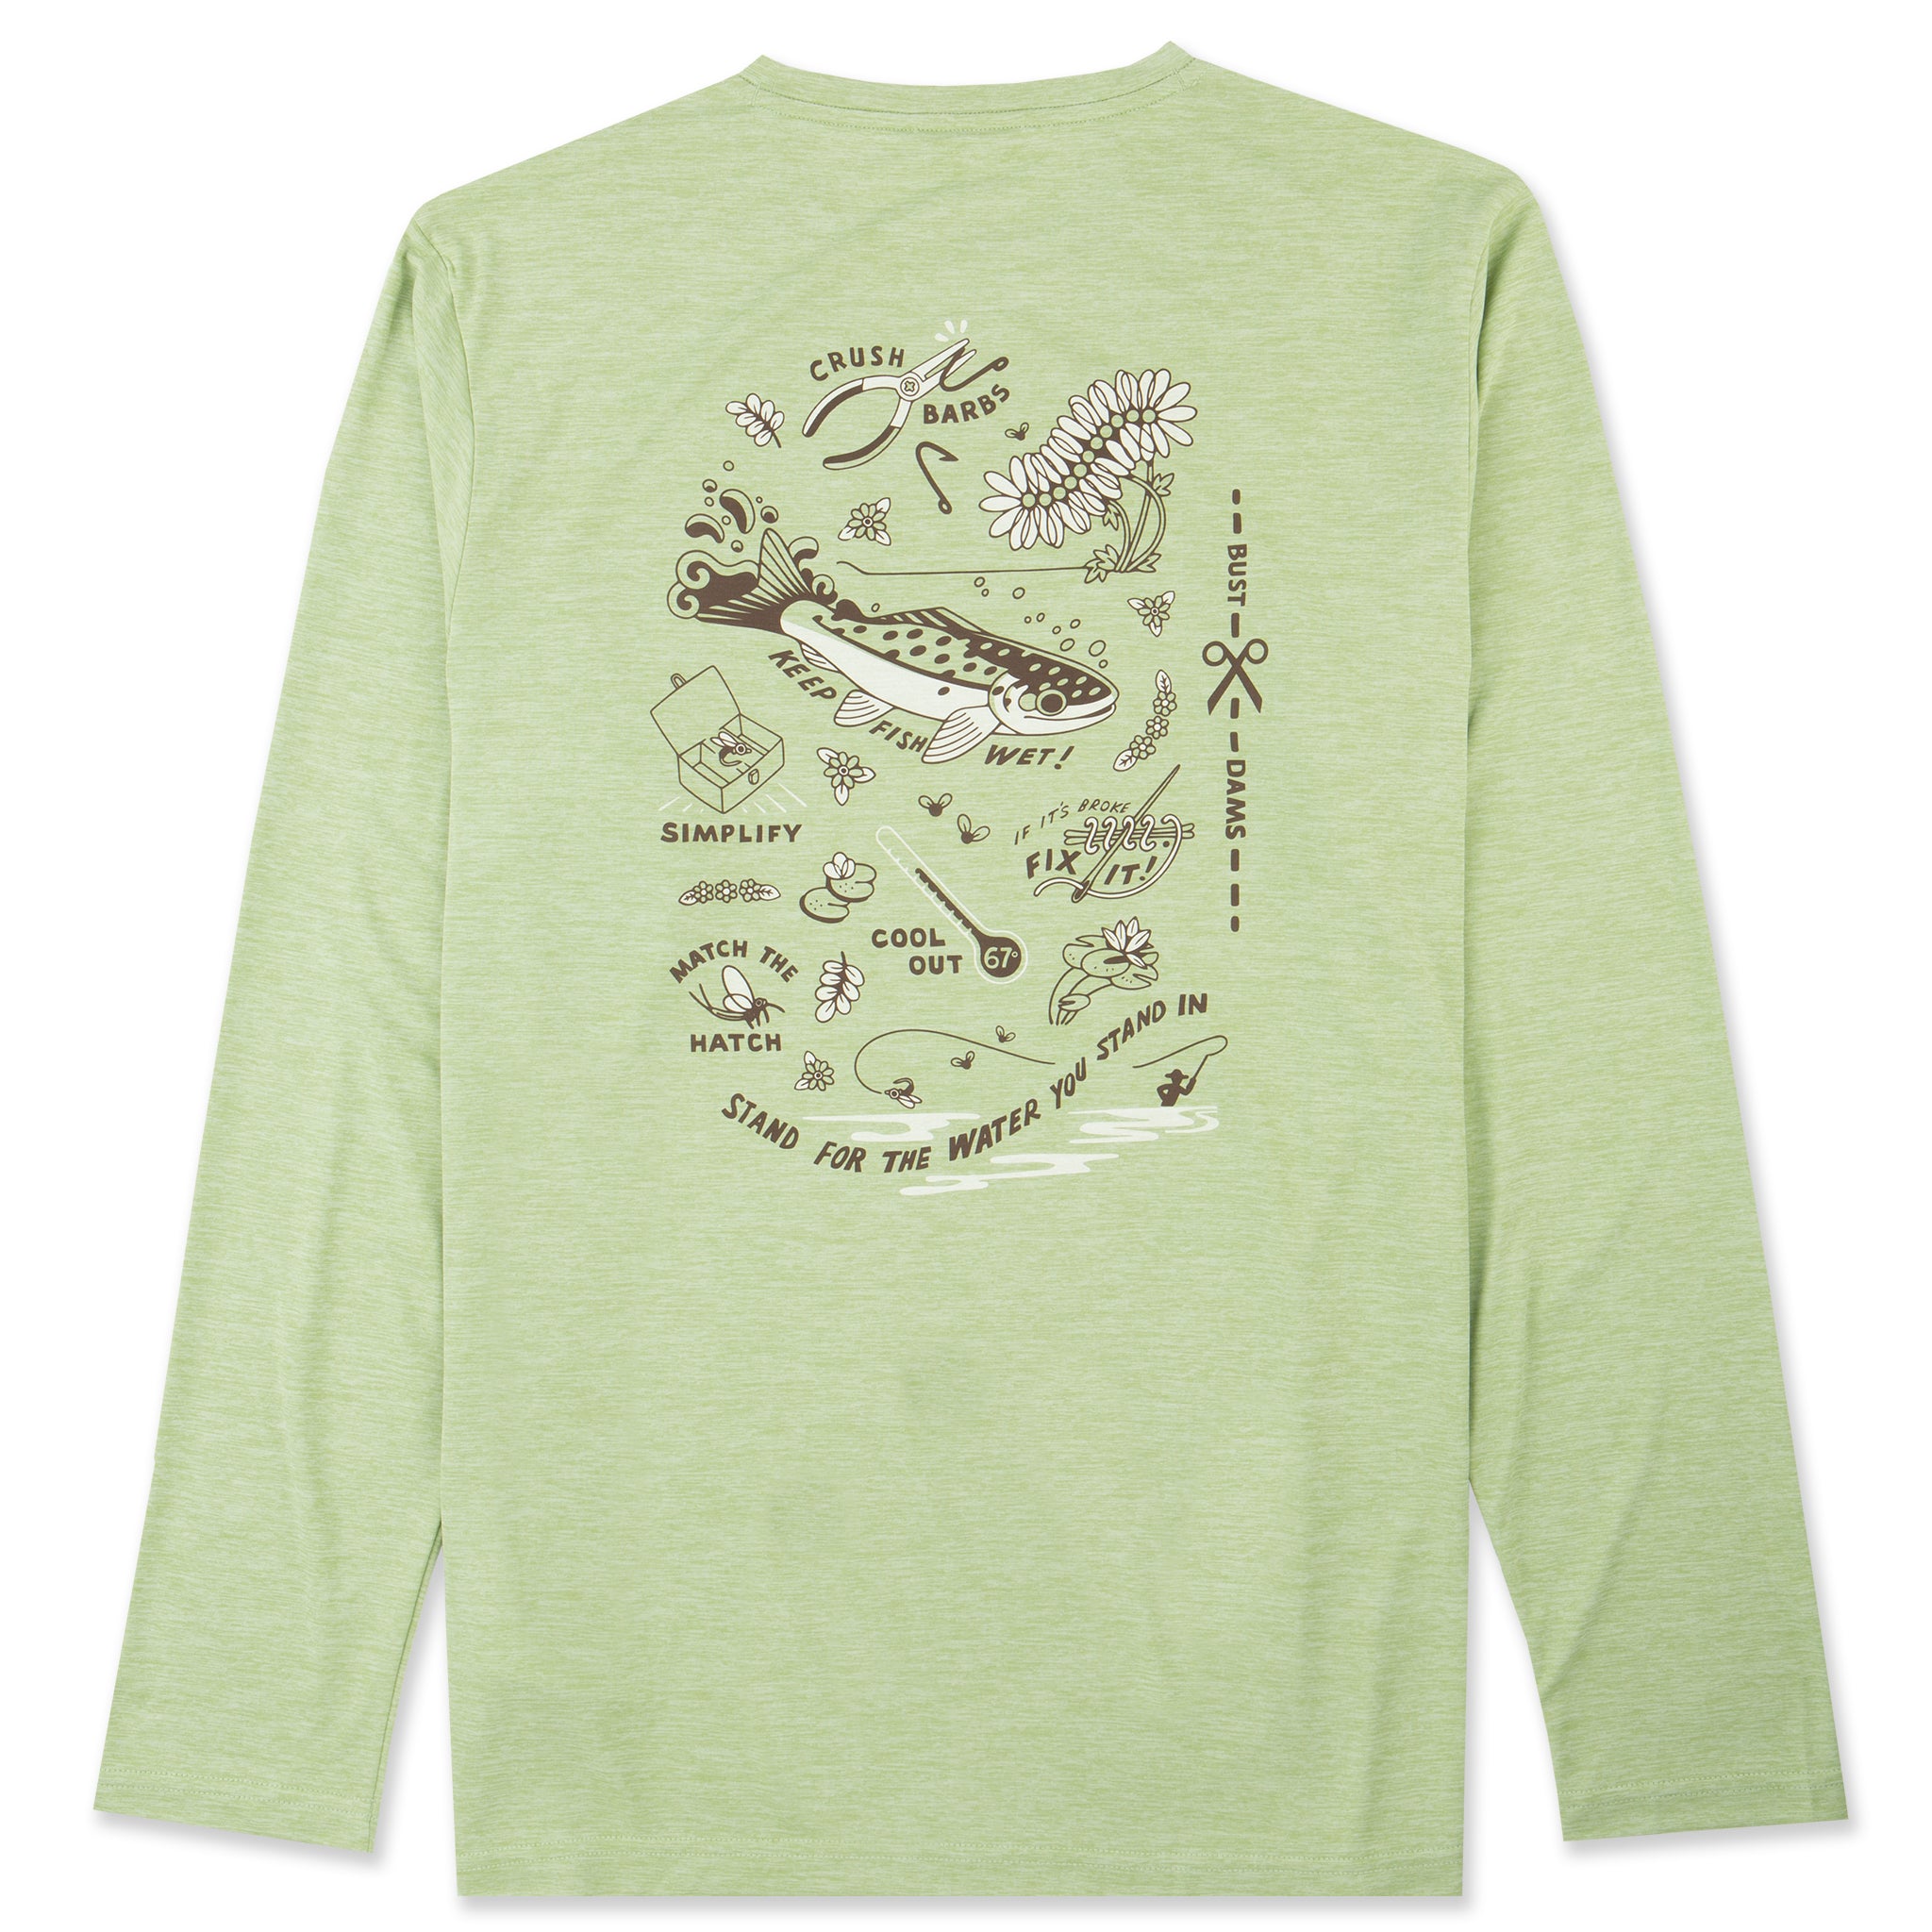 Patagonia Men's Long-Sleeved Capilene Cool Daily Fish Graphic